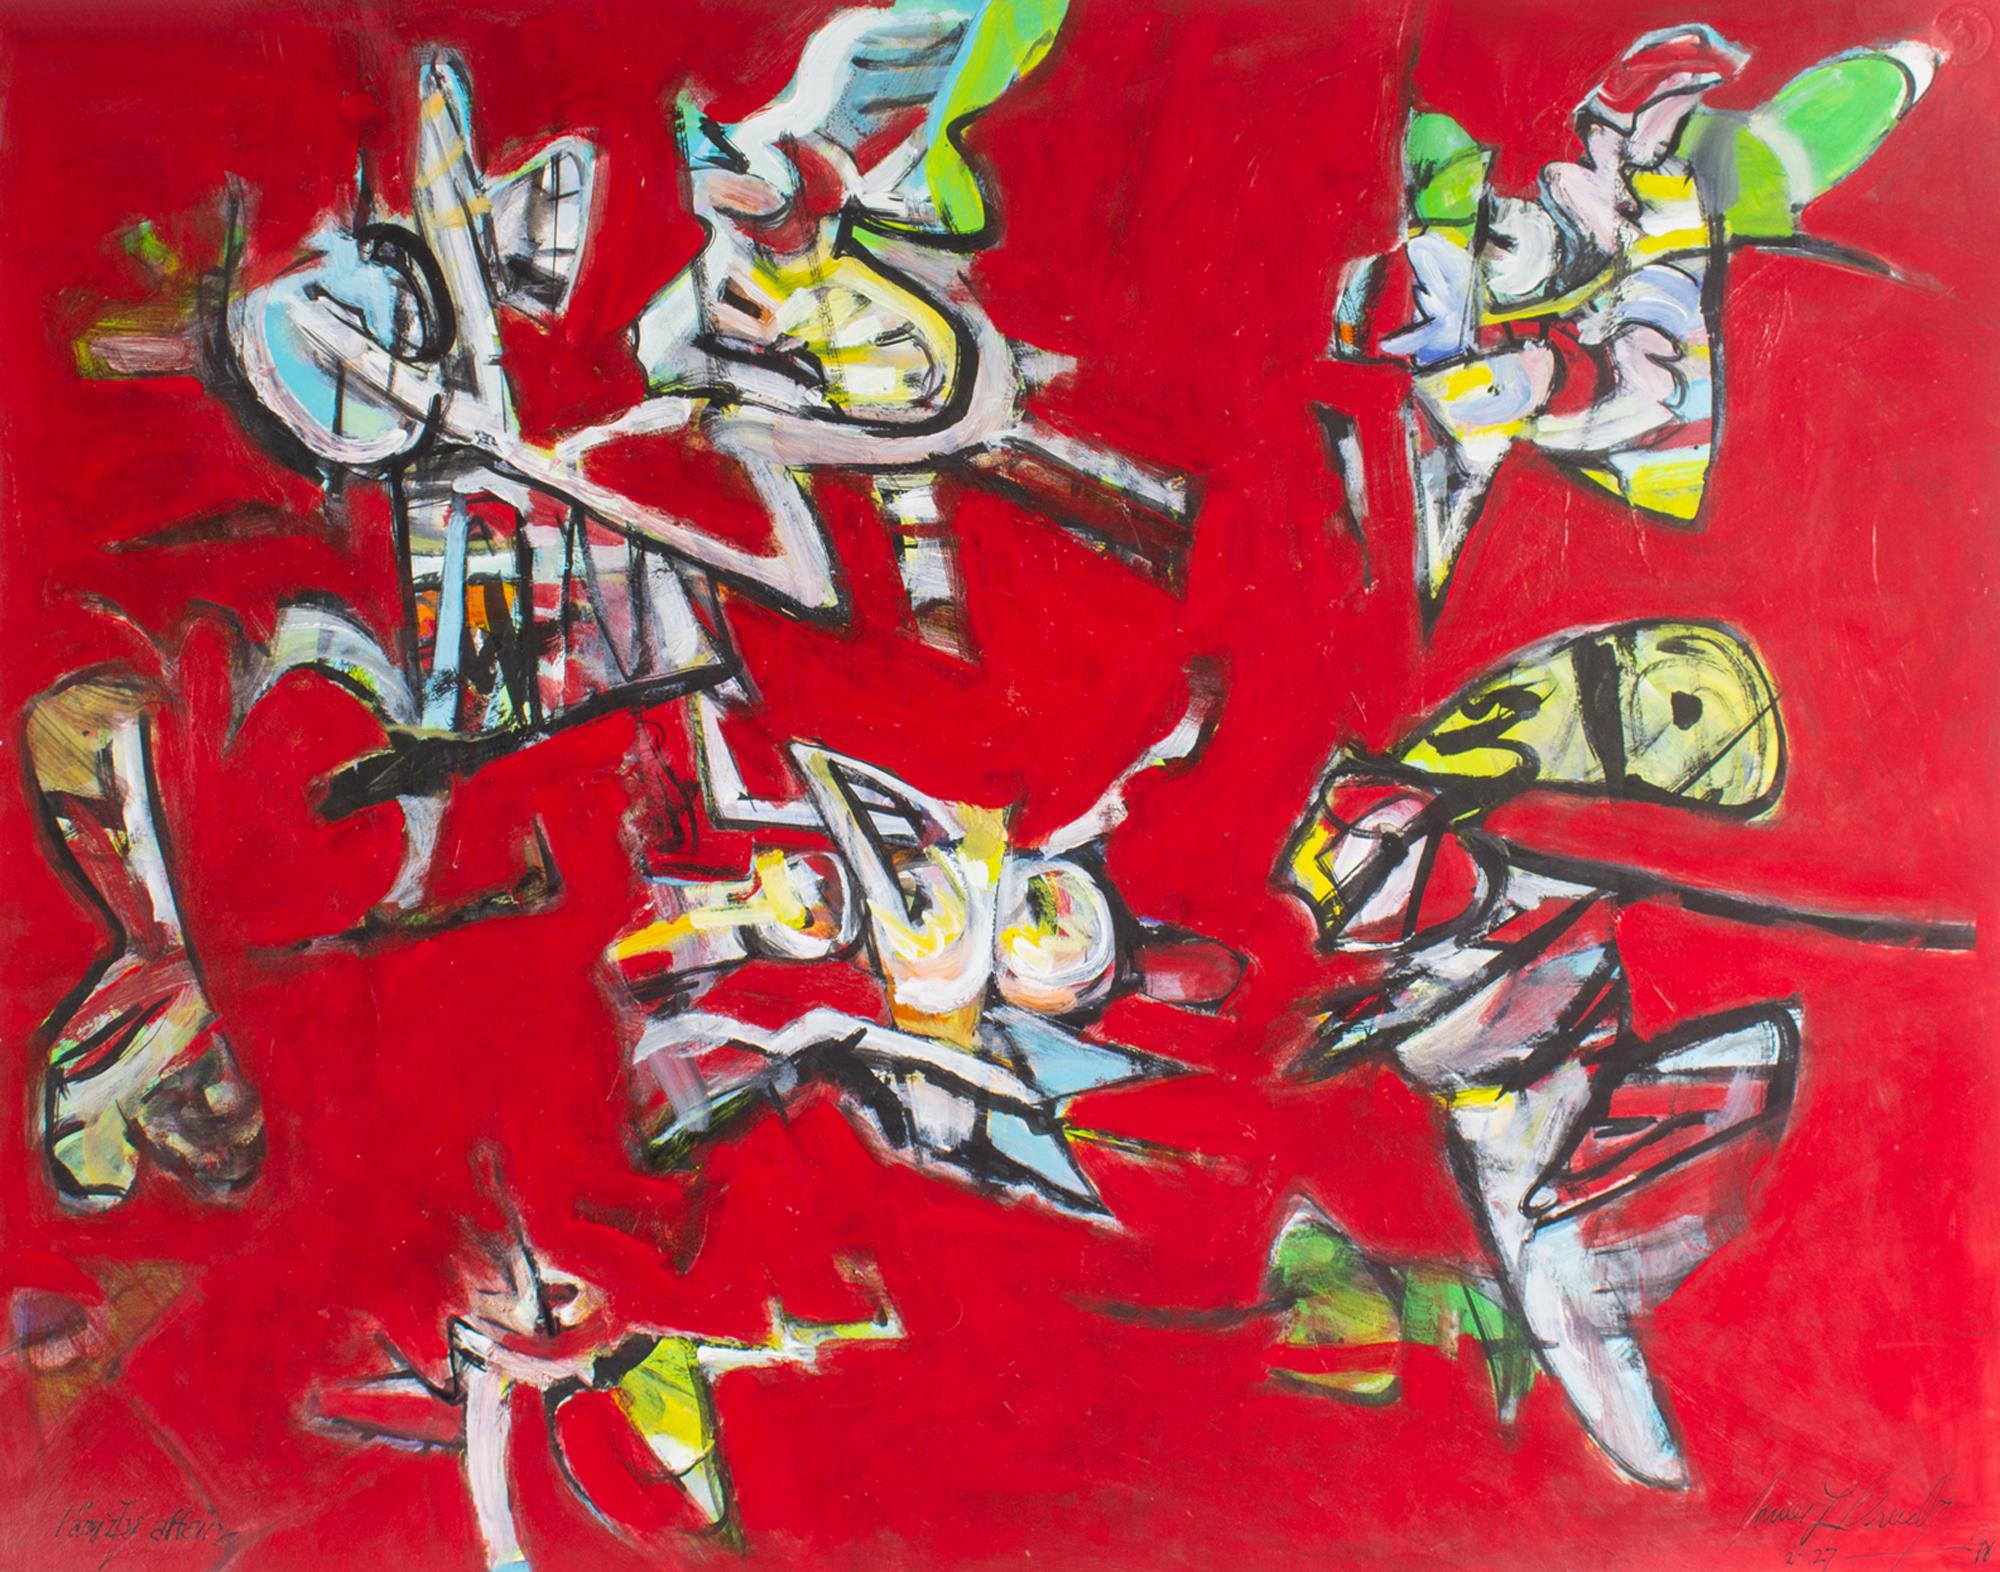 A 2010 mixed media on paper painting by the American artist James L. Bruch (1942-2023). Titled Family Affair, this abstract work has a deep red background punctuated by colorful shapes in green, blue, yellow, and white. Signed and dated to the lower